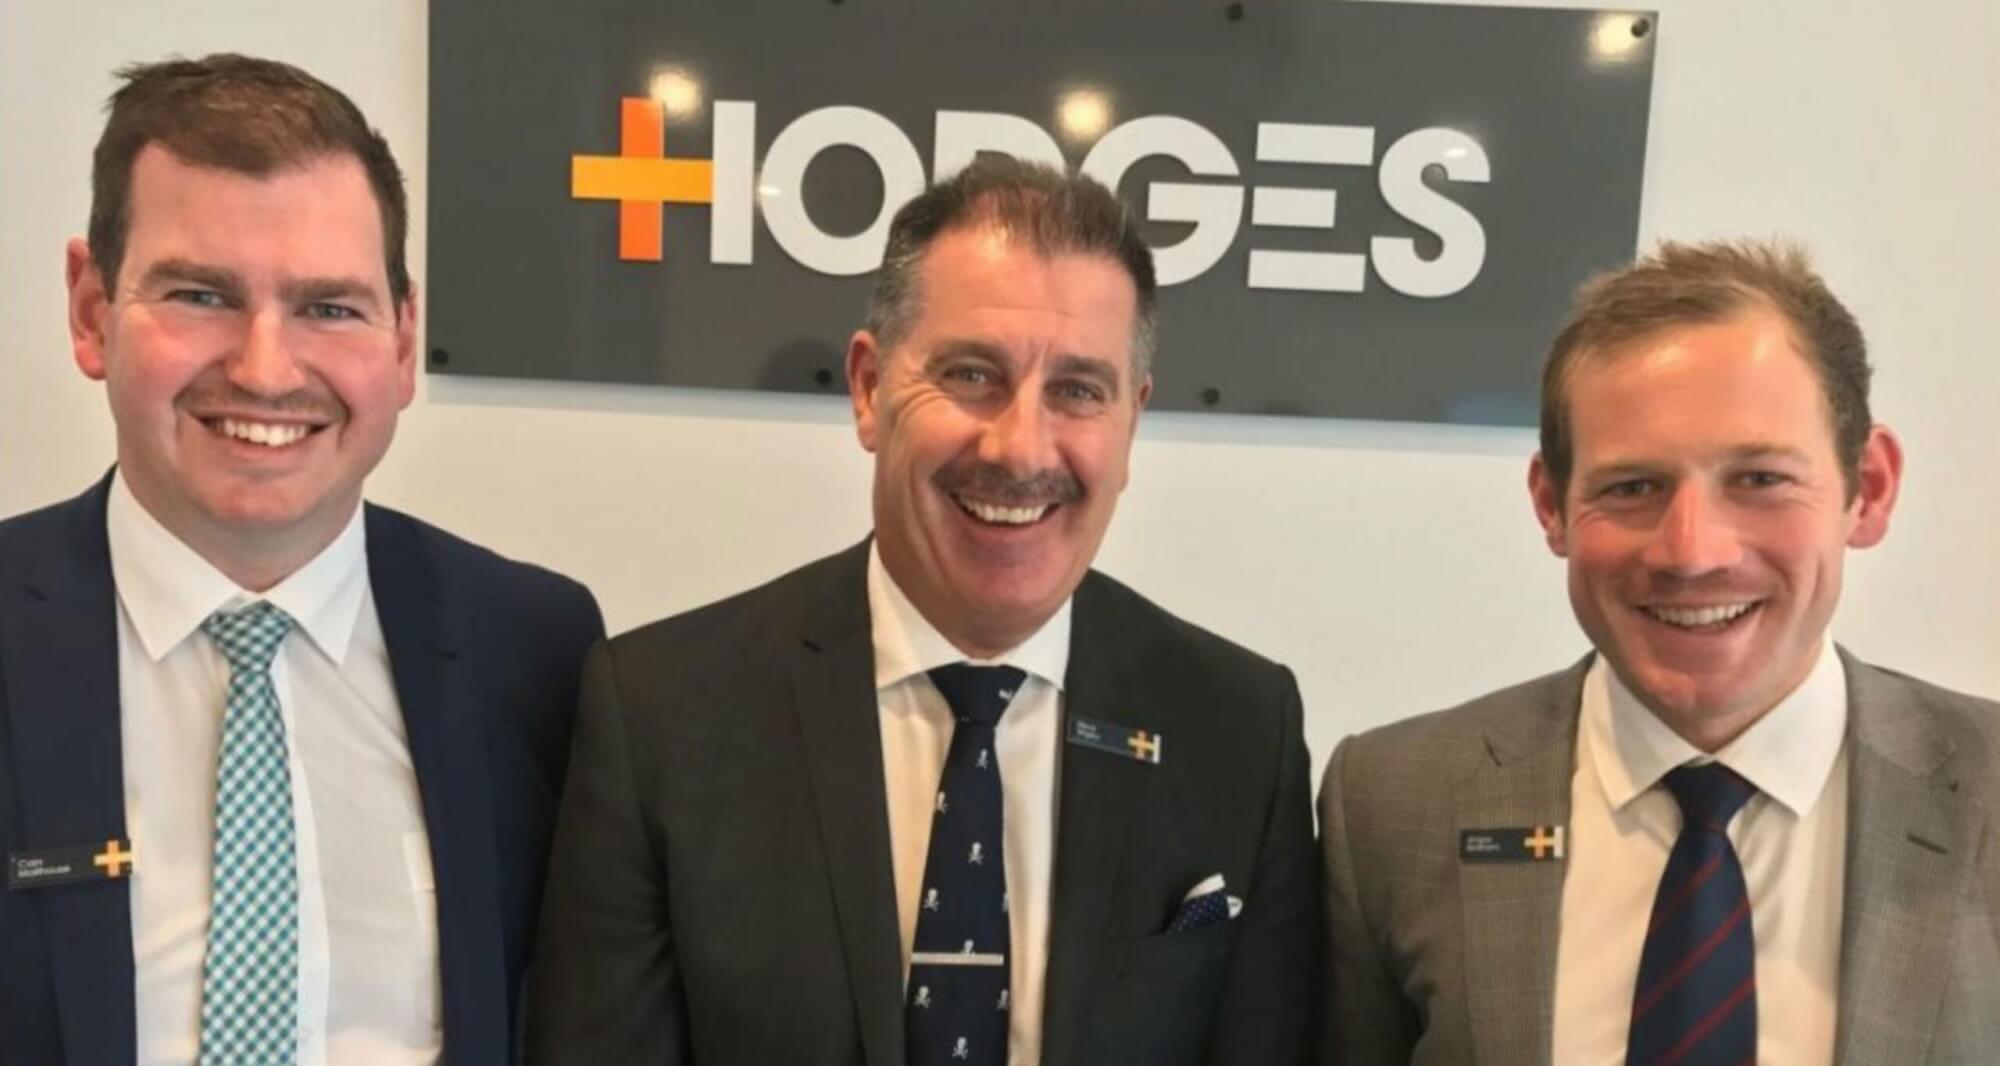 Hodges give more to the local community